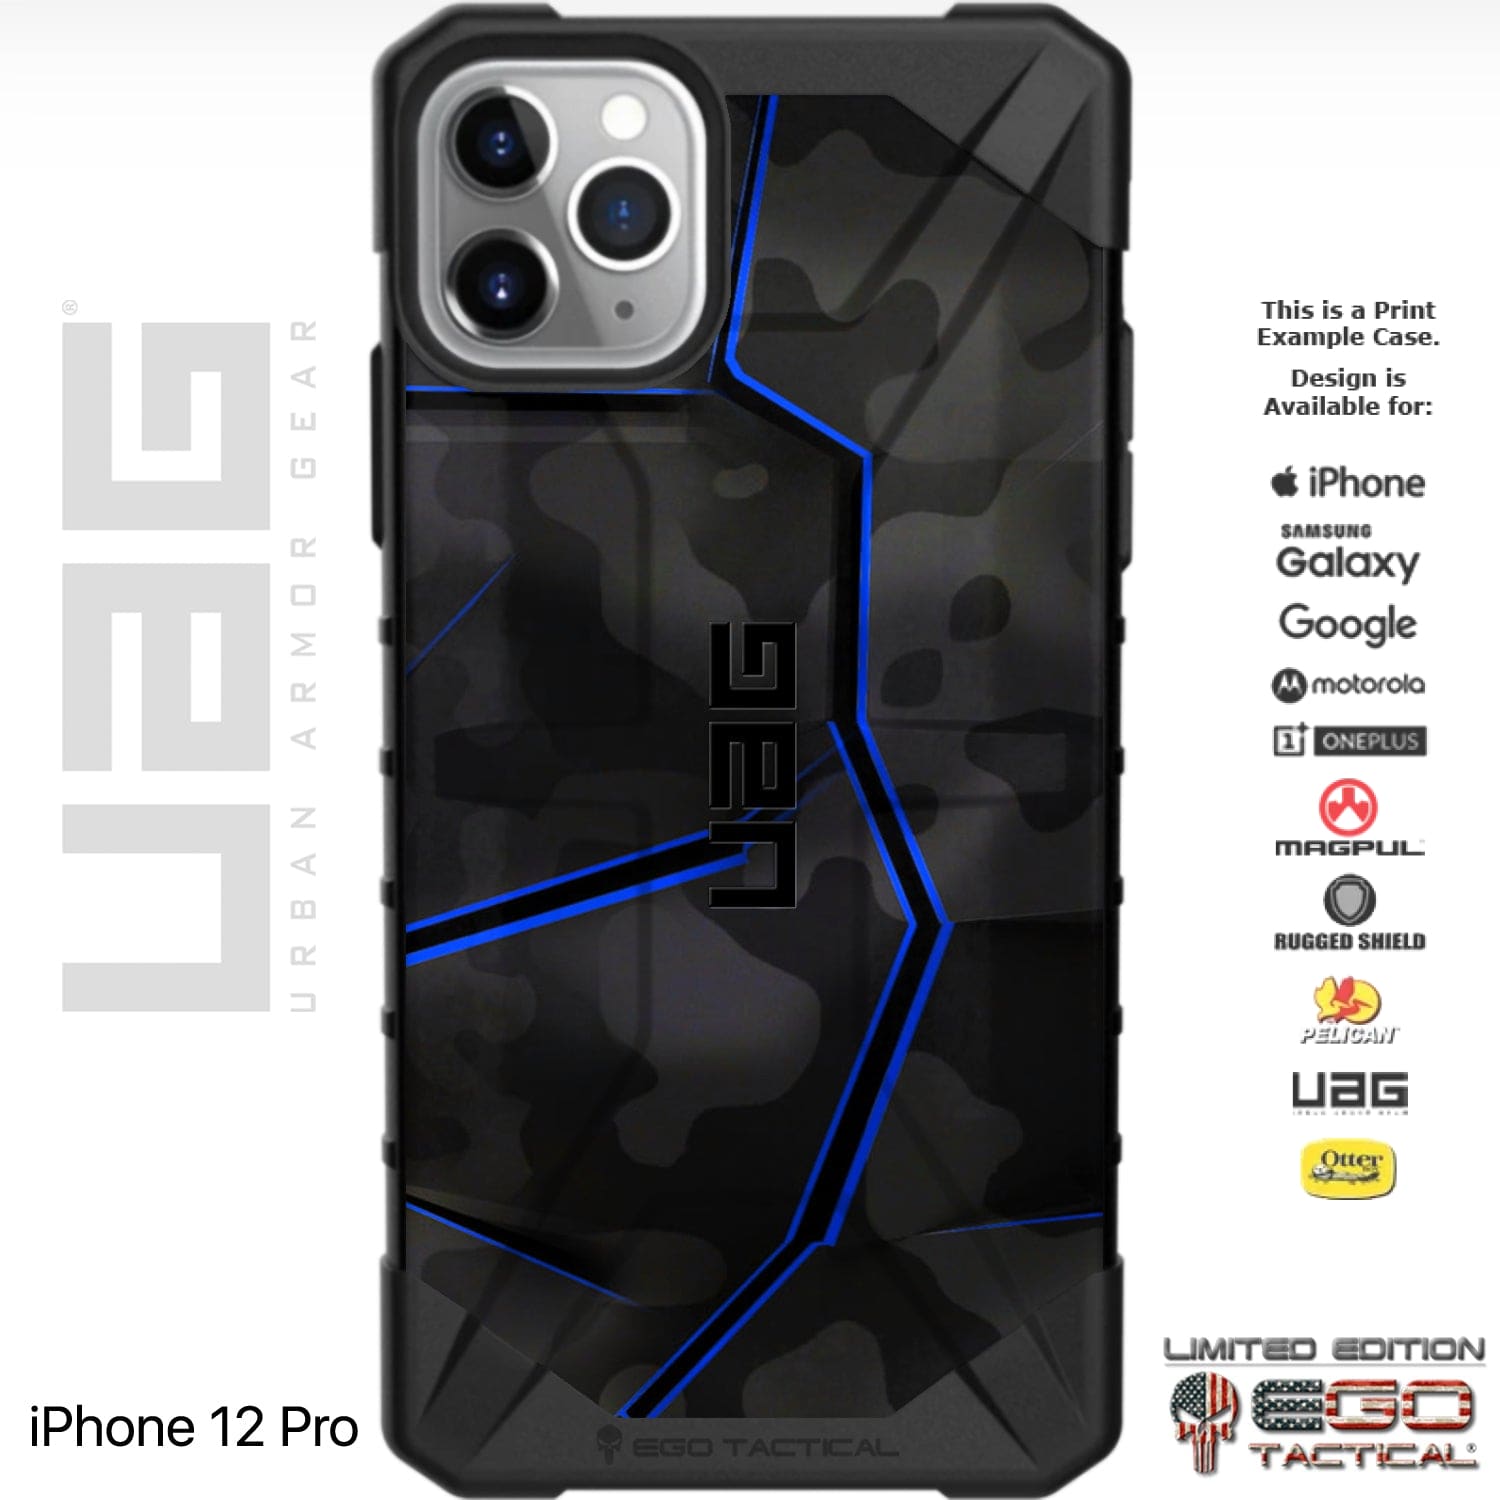 The Jagged Blue Line Police & Jagged Red Line Fireman Custom Printed Android & Apple Phone Case Design